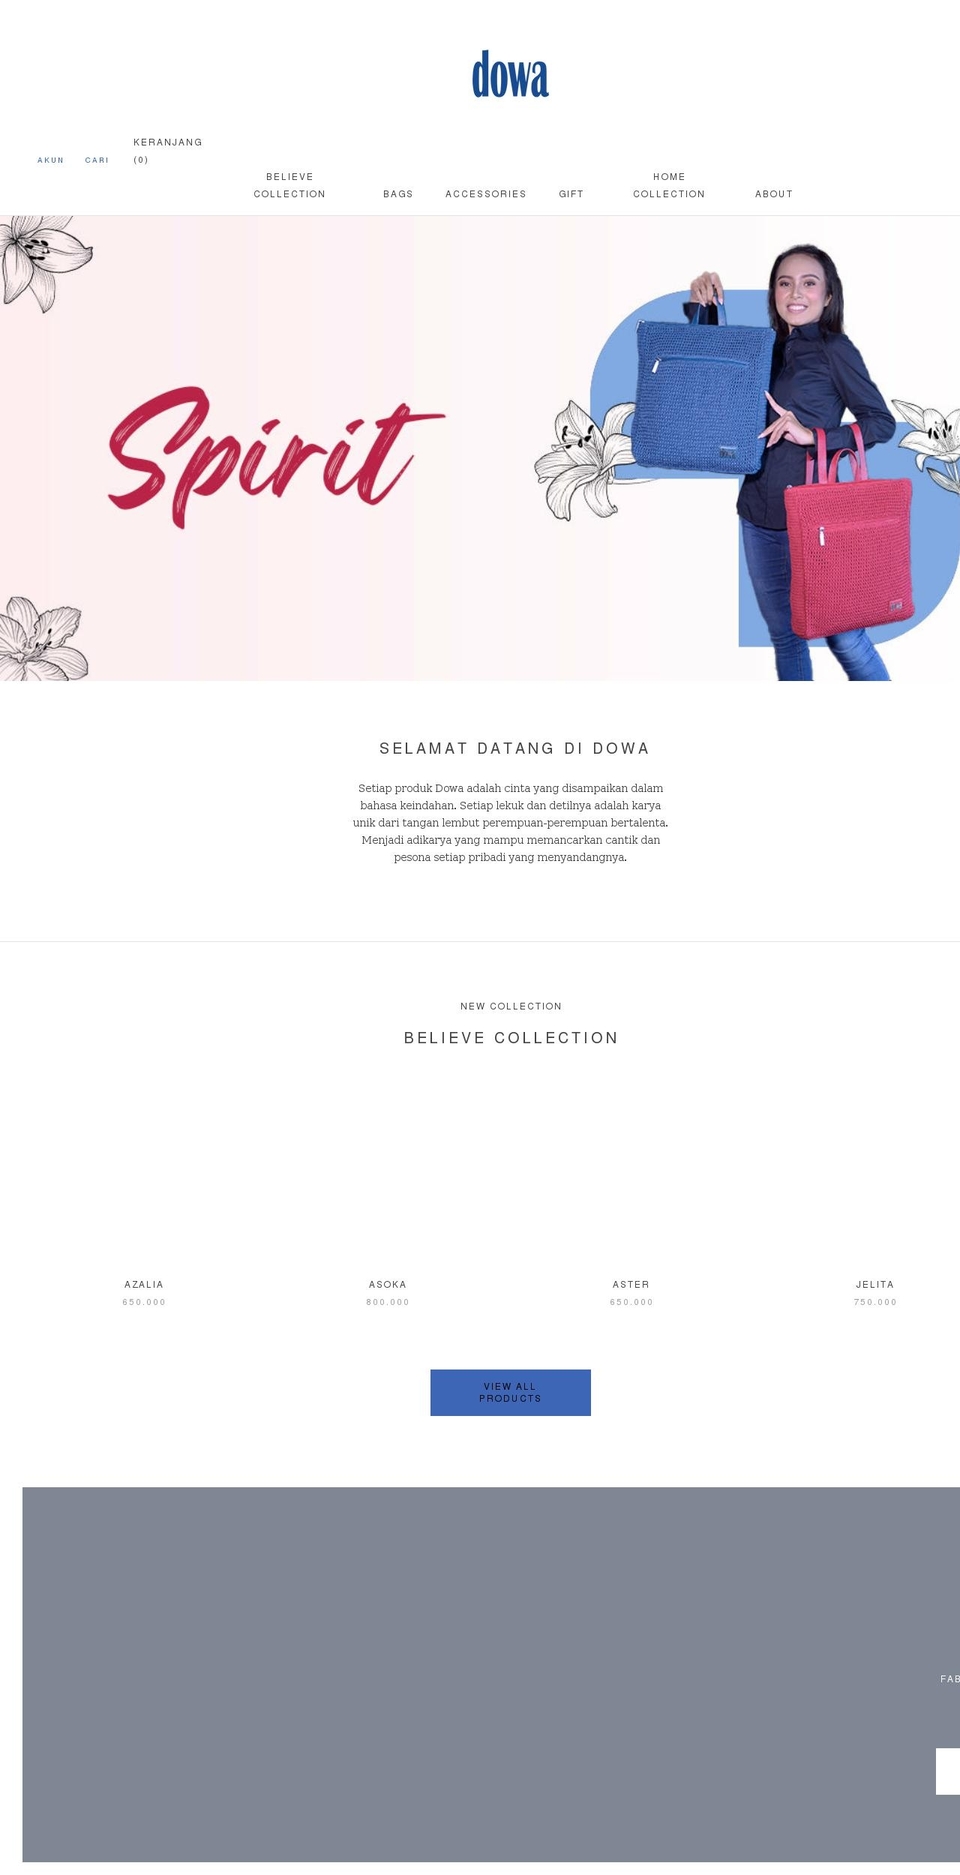 Template GIFT Updated  Desember Shopify theme site example dowabag.co.id